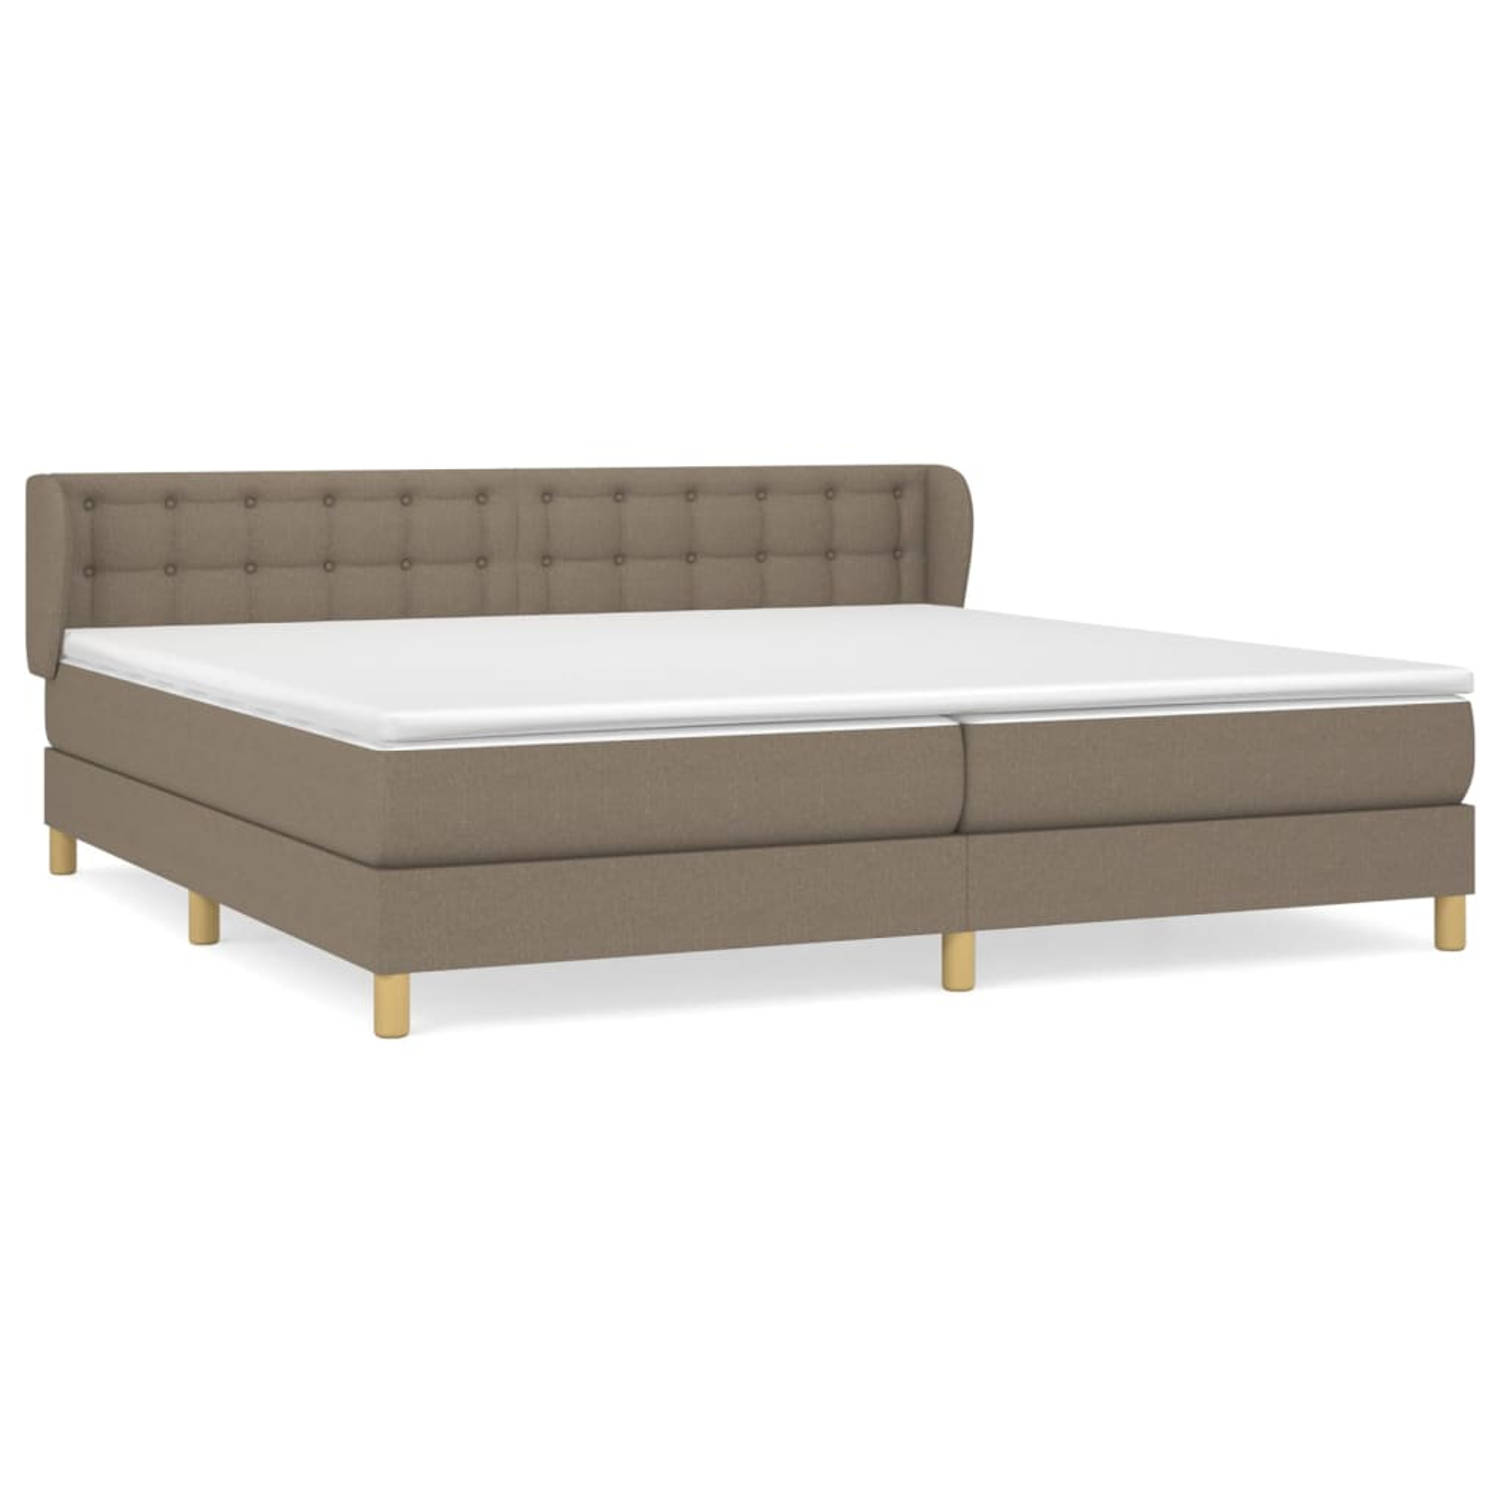 The Living Store Boxspringbed - Comfort - Bed - 203 x 203 x 78/88 cm - Taupe